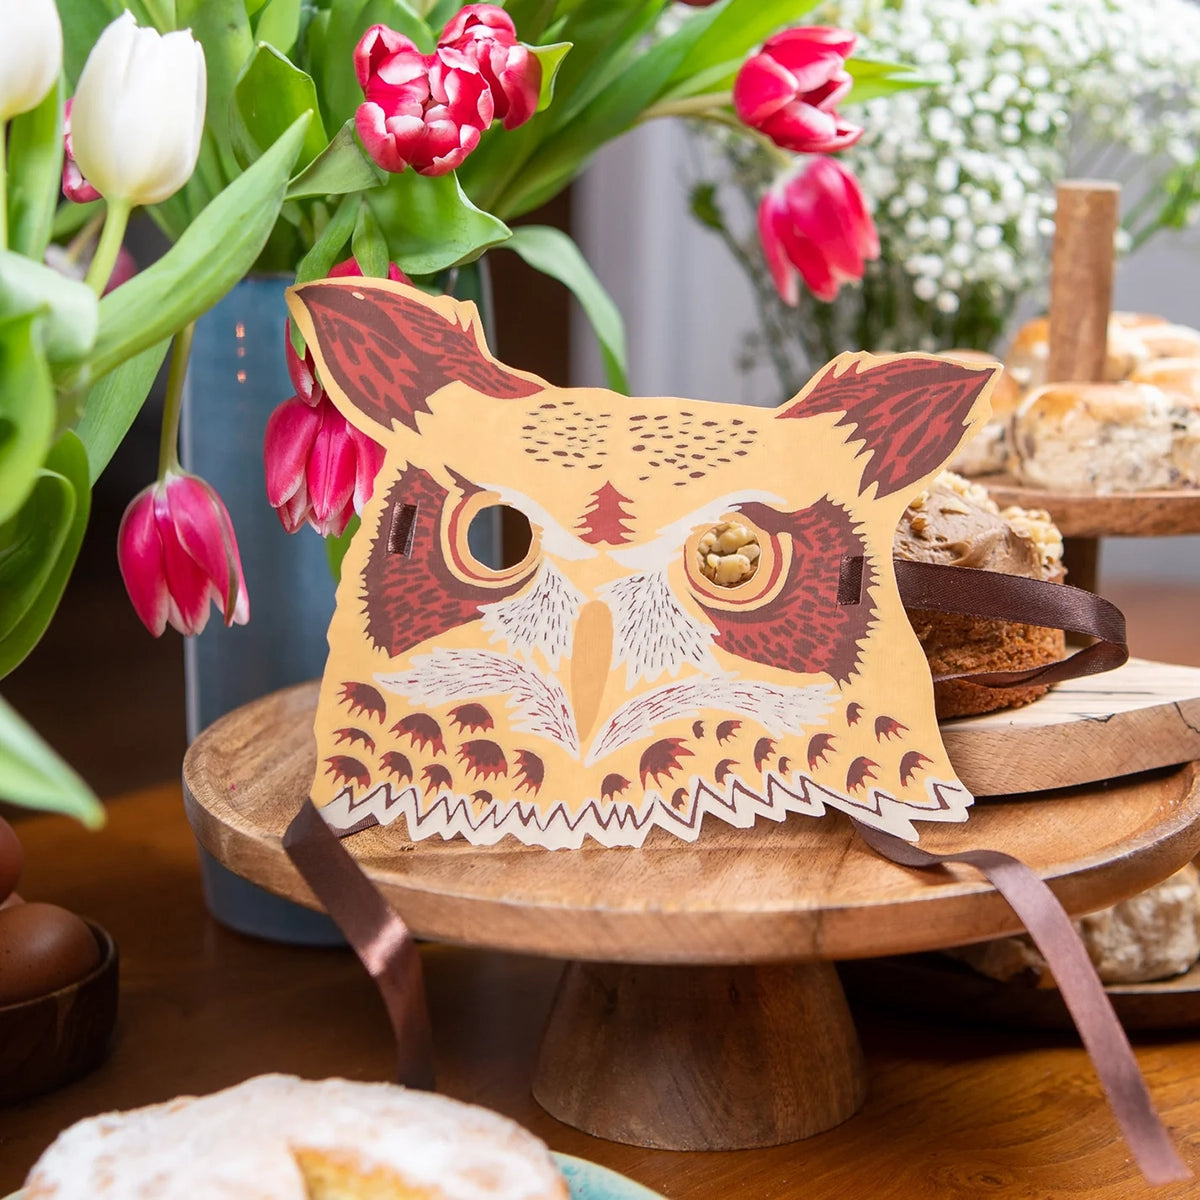 Owl shaped greetings card on a table surrounded by flowers